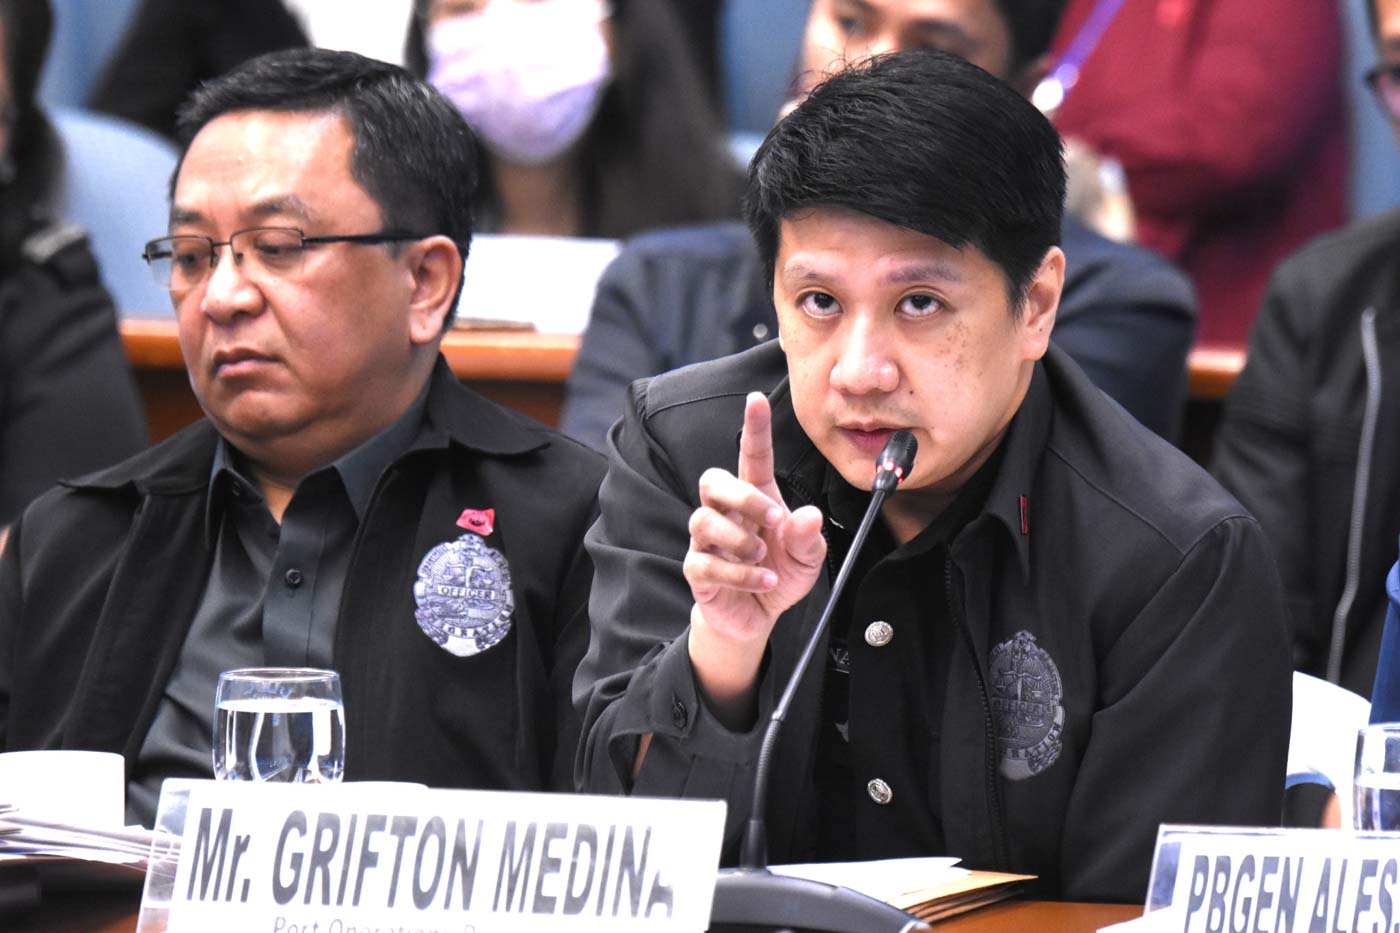 BUREAU OF IMMIGRATION. Mr. Grifton Medina, Port Operations Division of the Bureau of Immigration, at the senate inquiry on the sex trafficking connected to POGO operations in the country, February 17, 2020. Photo by Angie de Silva/Rappler 